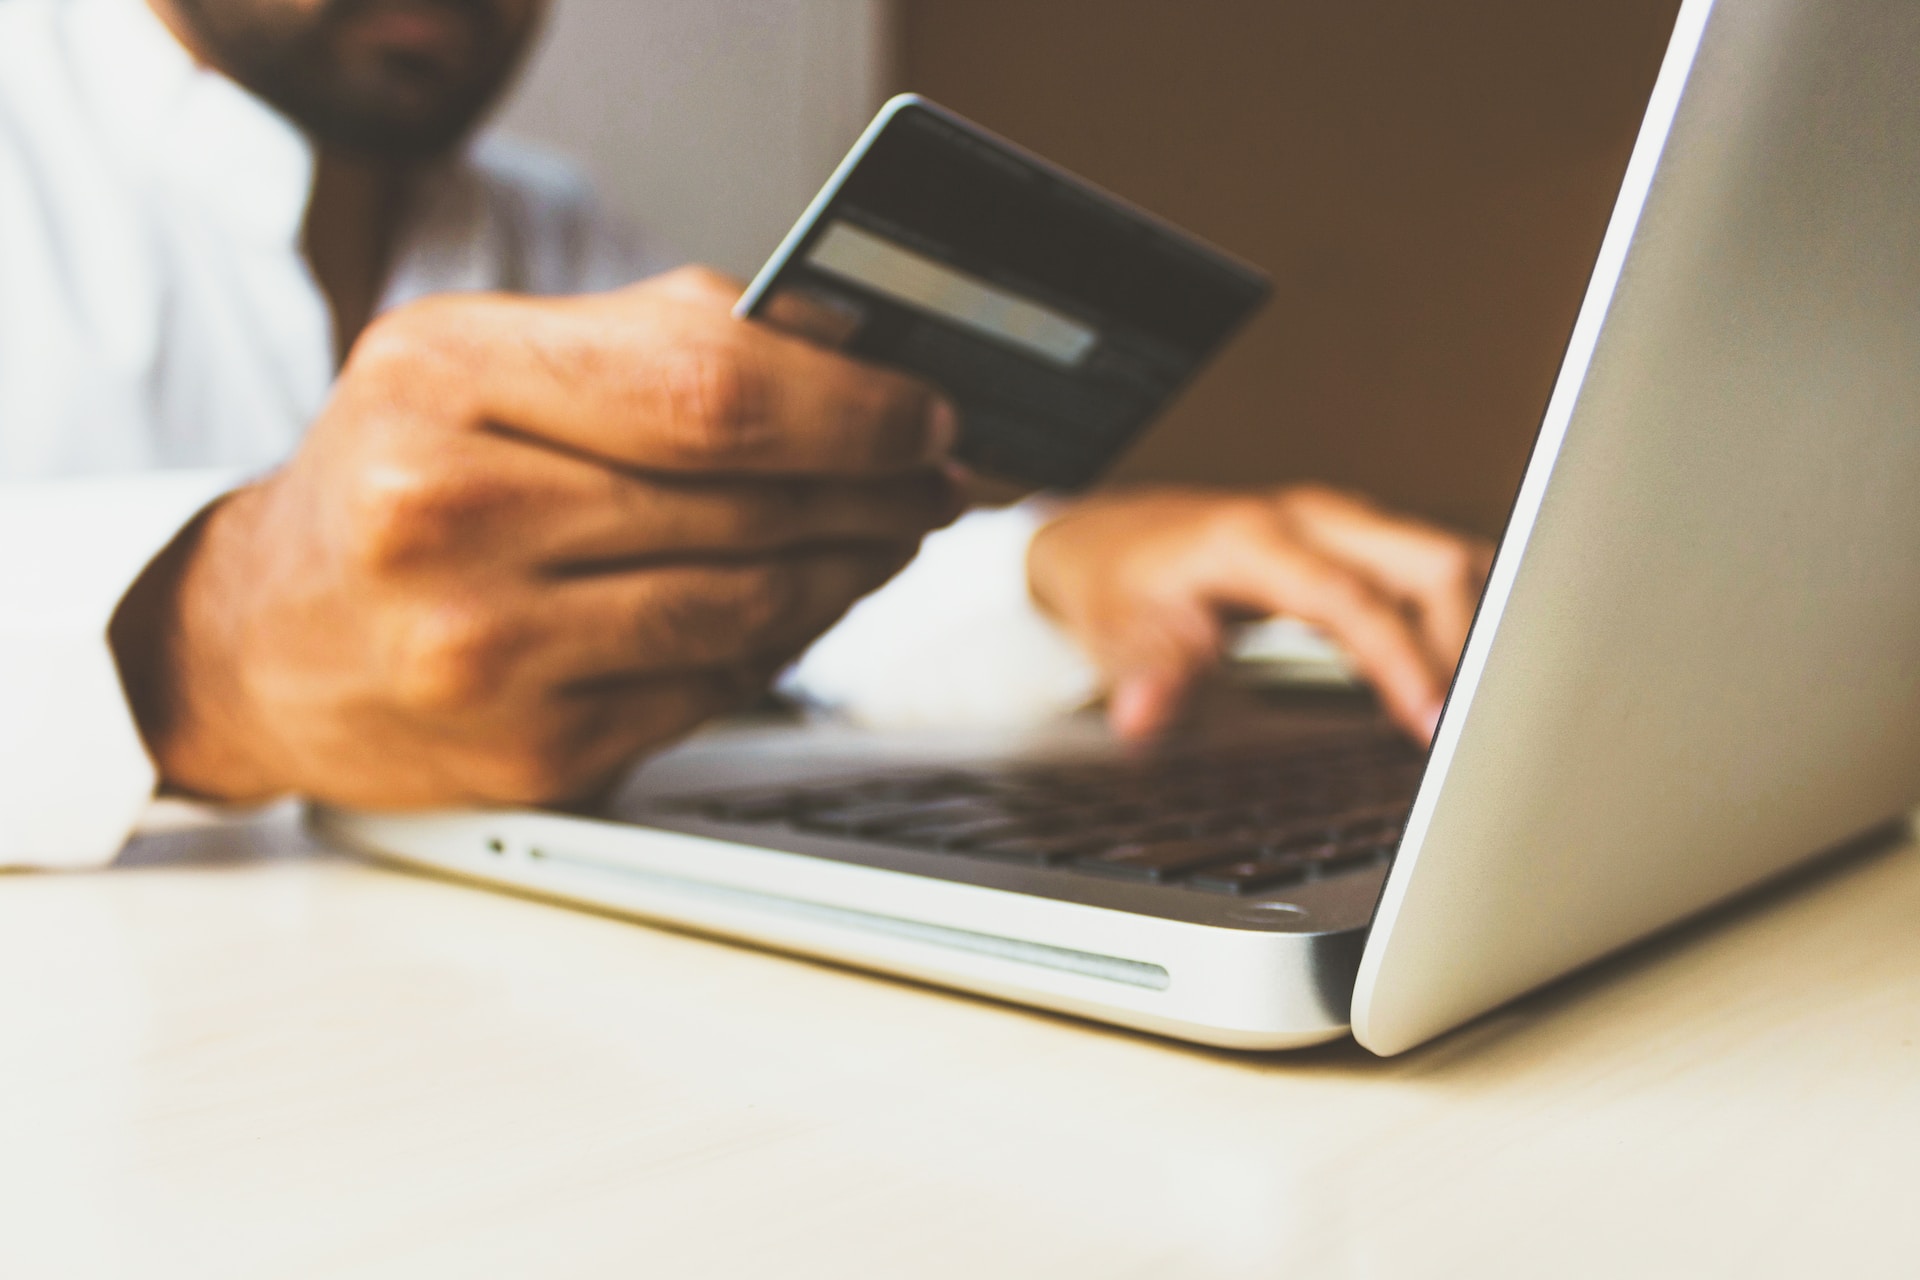 Using a debt card to pay for an online purchase